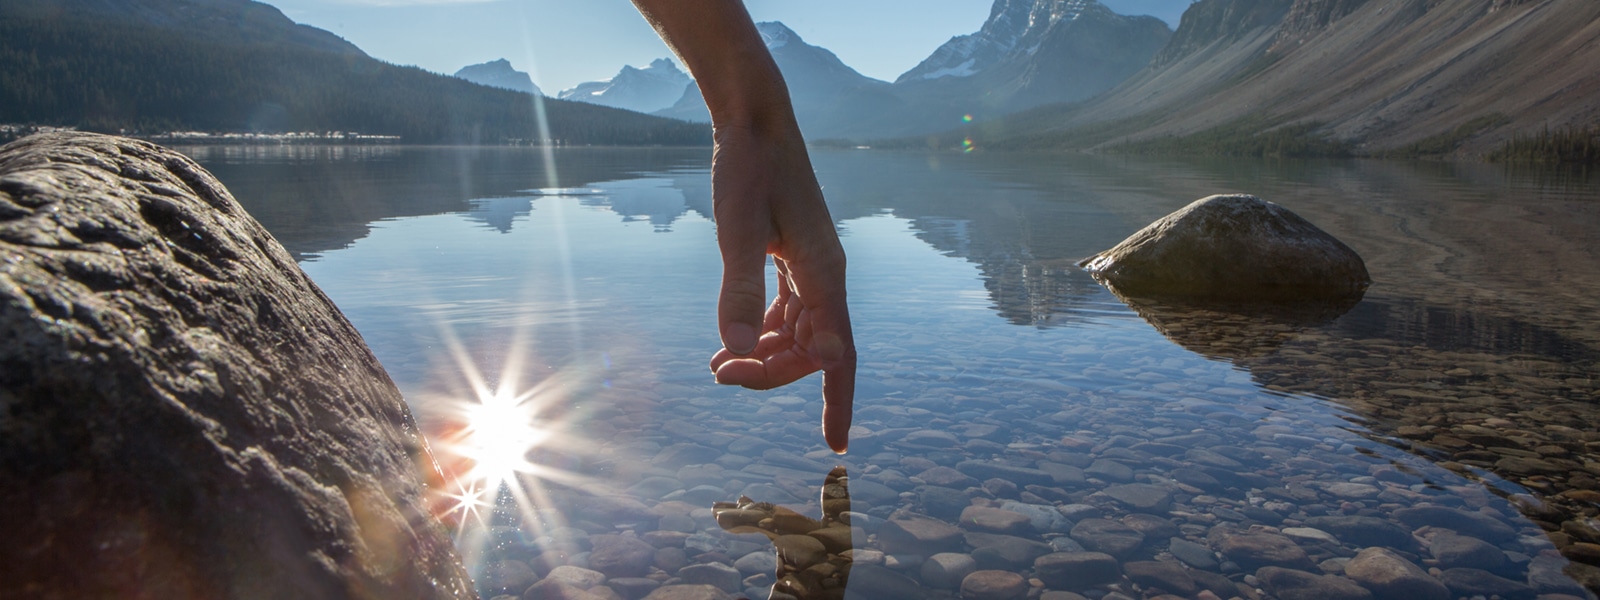 Finger touches surface of mountain lake. The sun and the landscape is reflecting on the water.